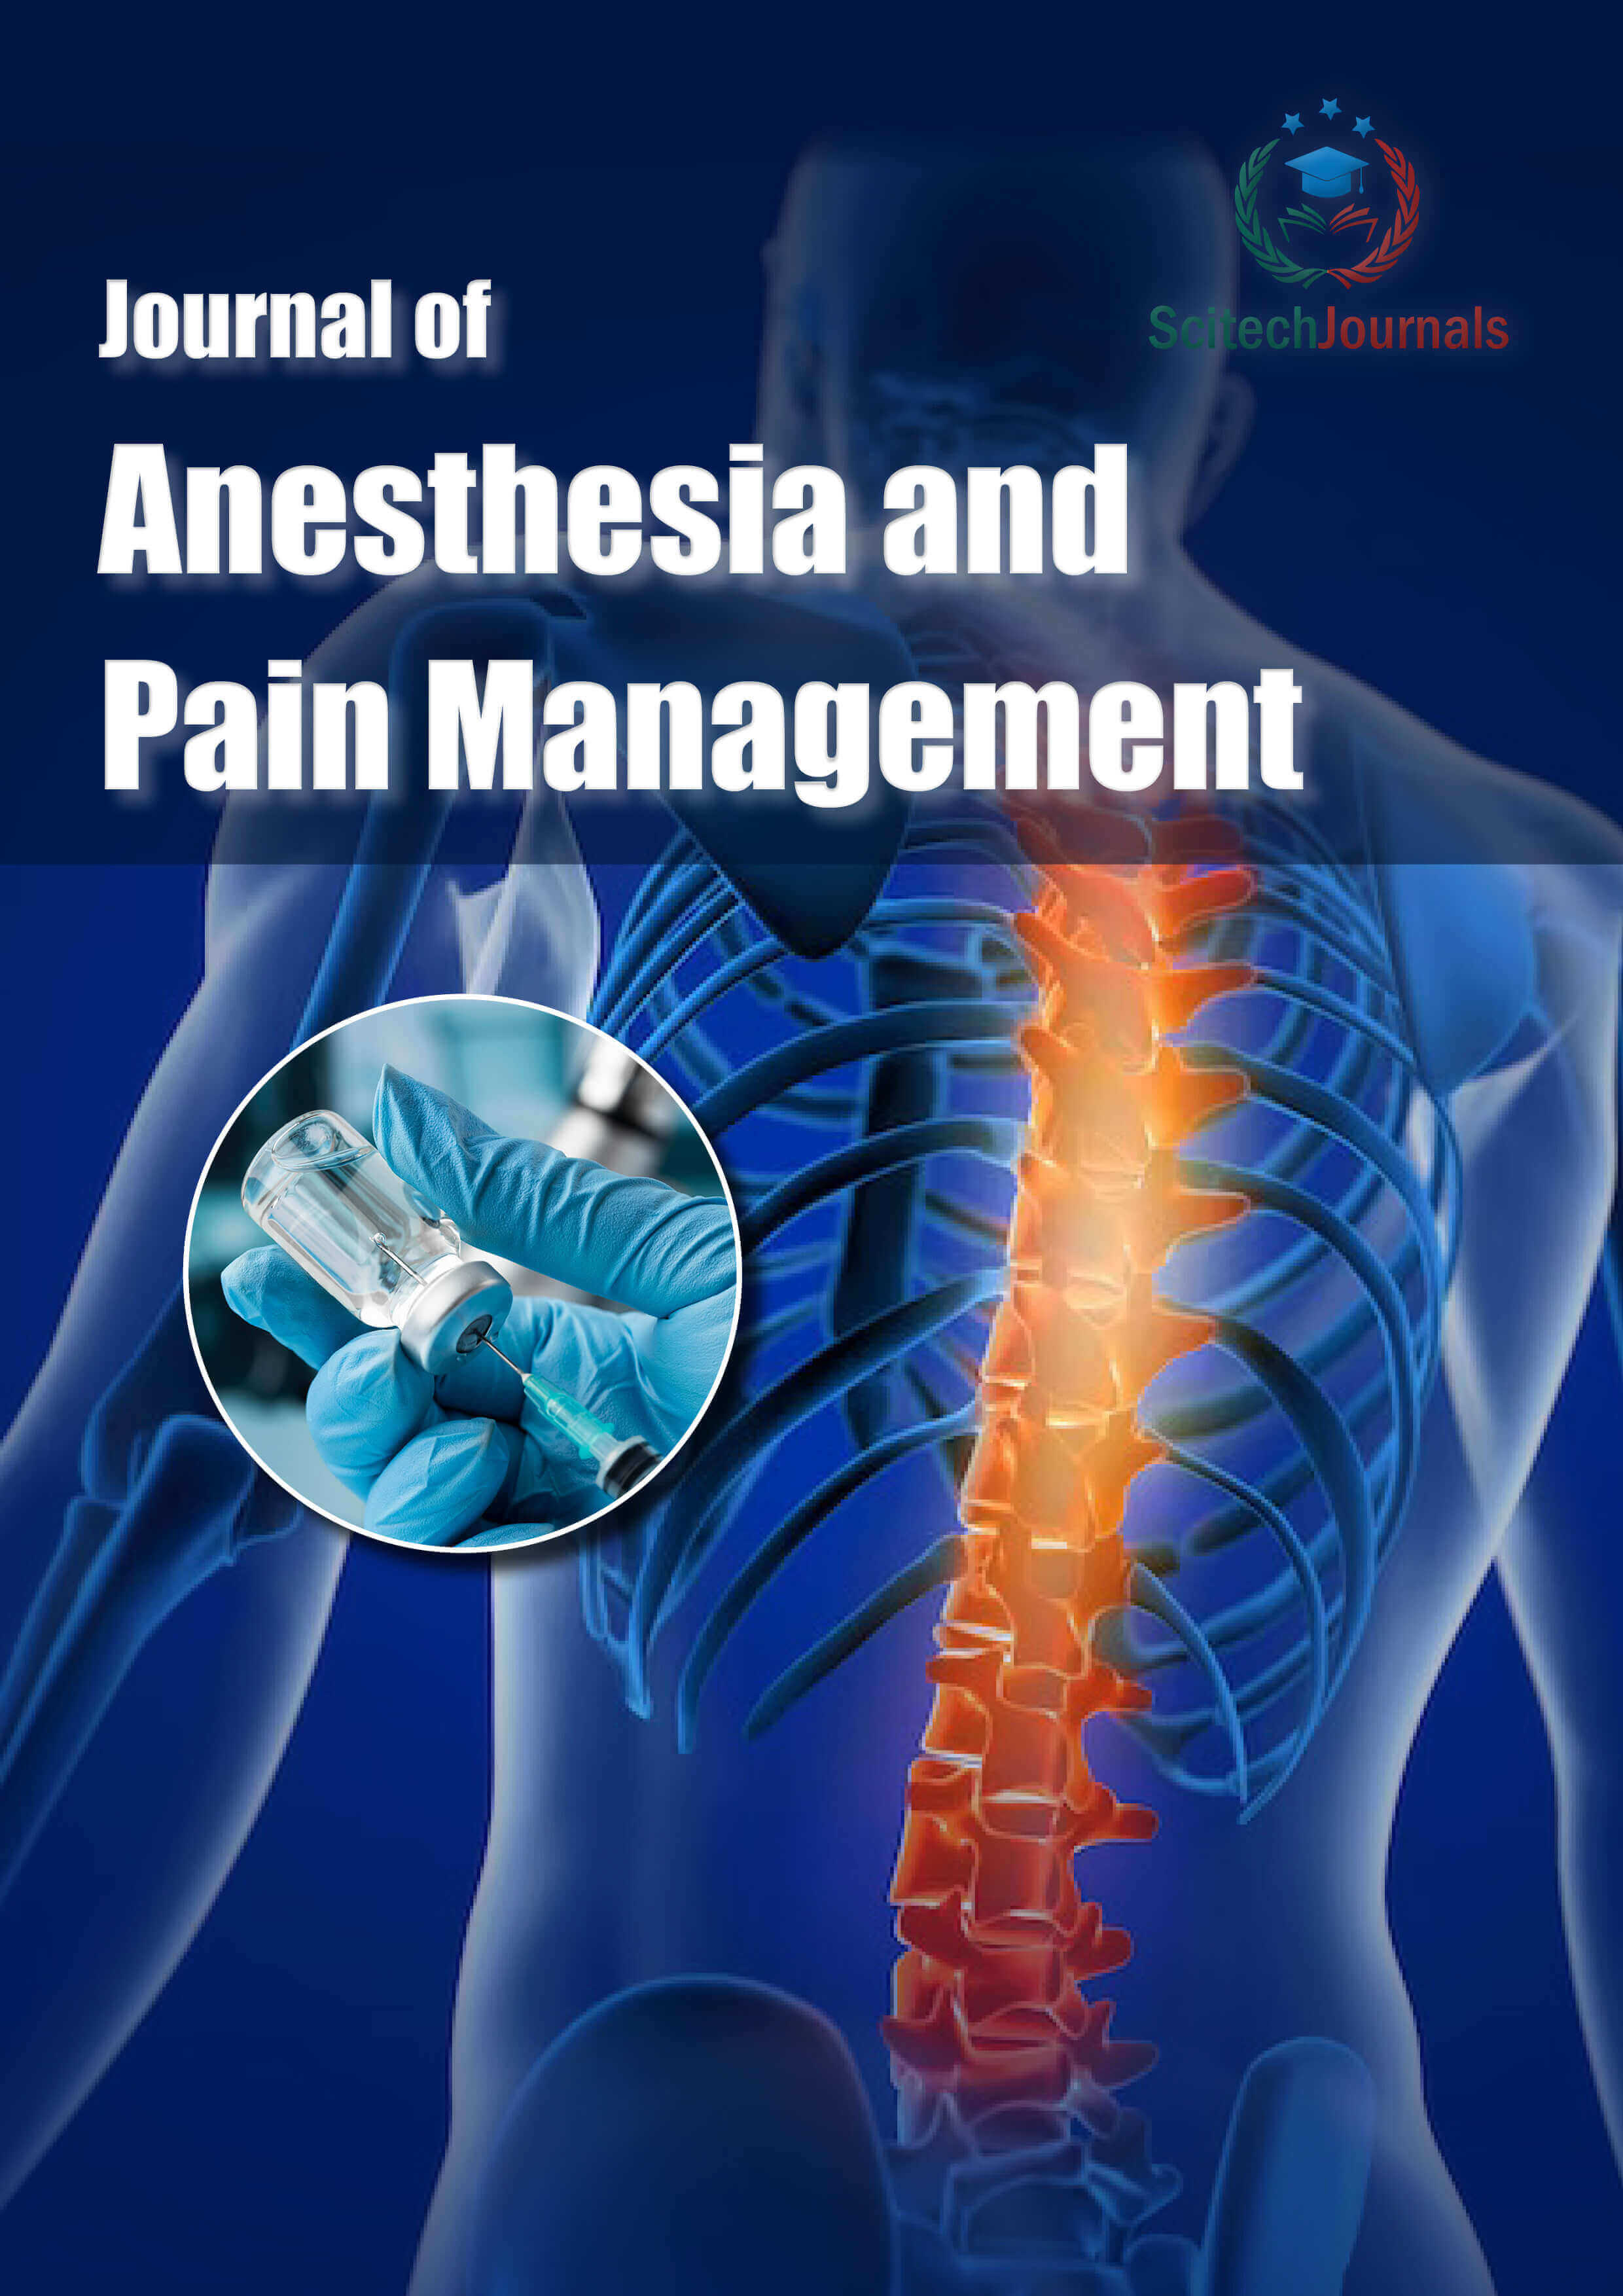 Journal of Anesthesia and Pain Management